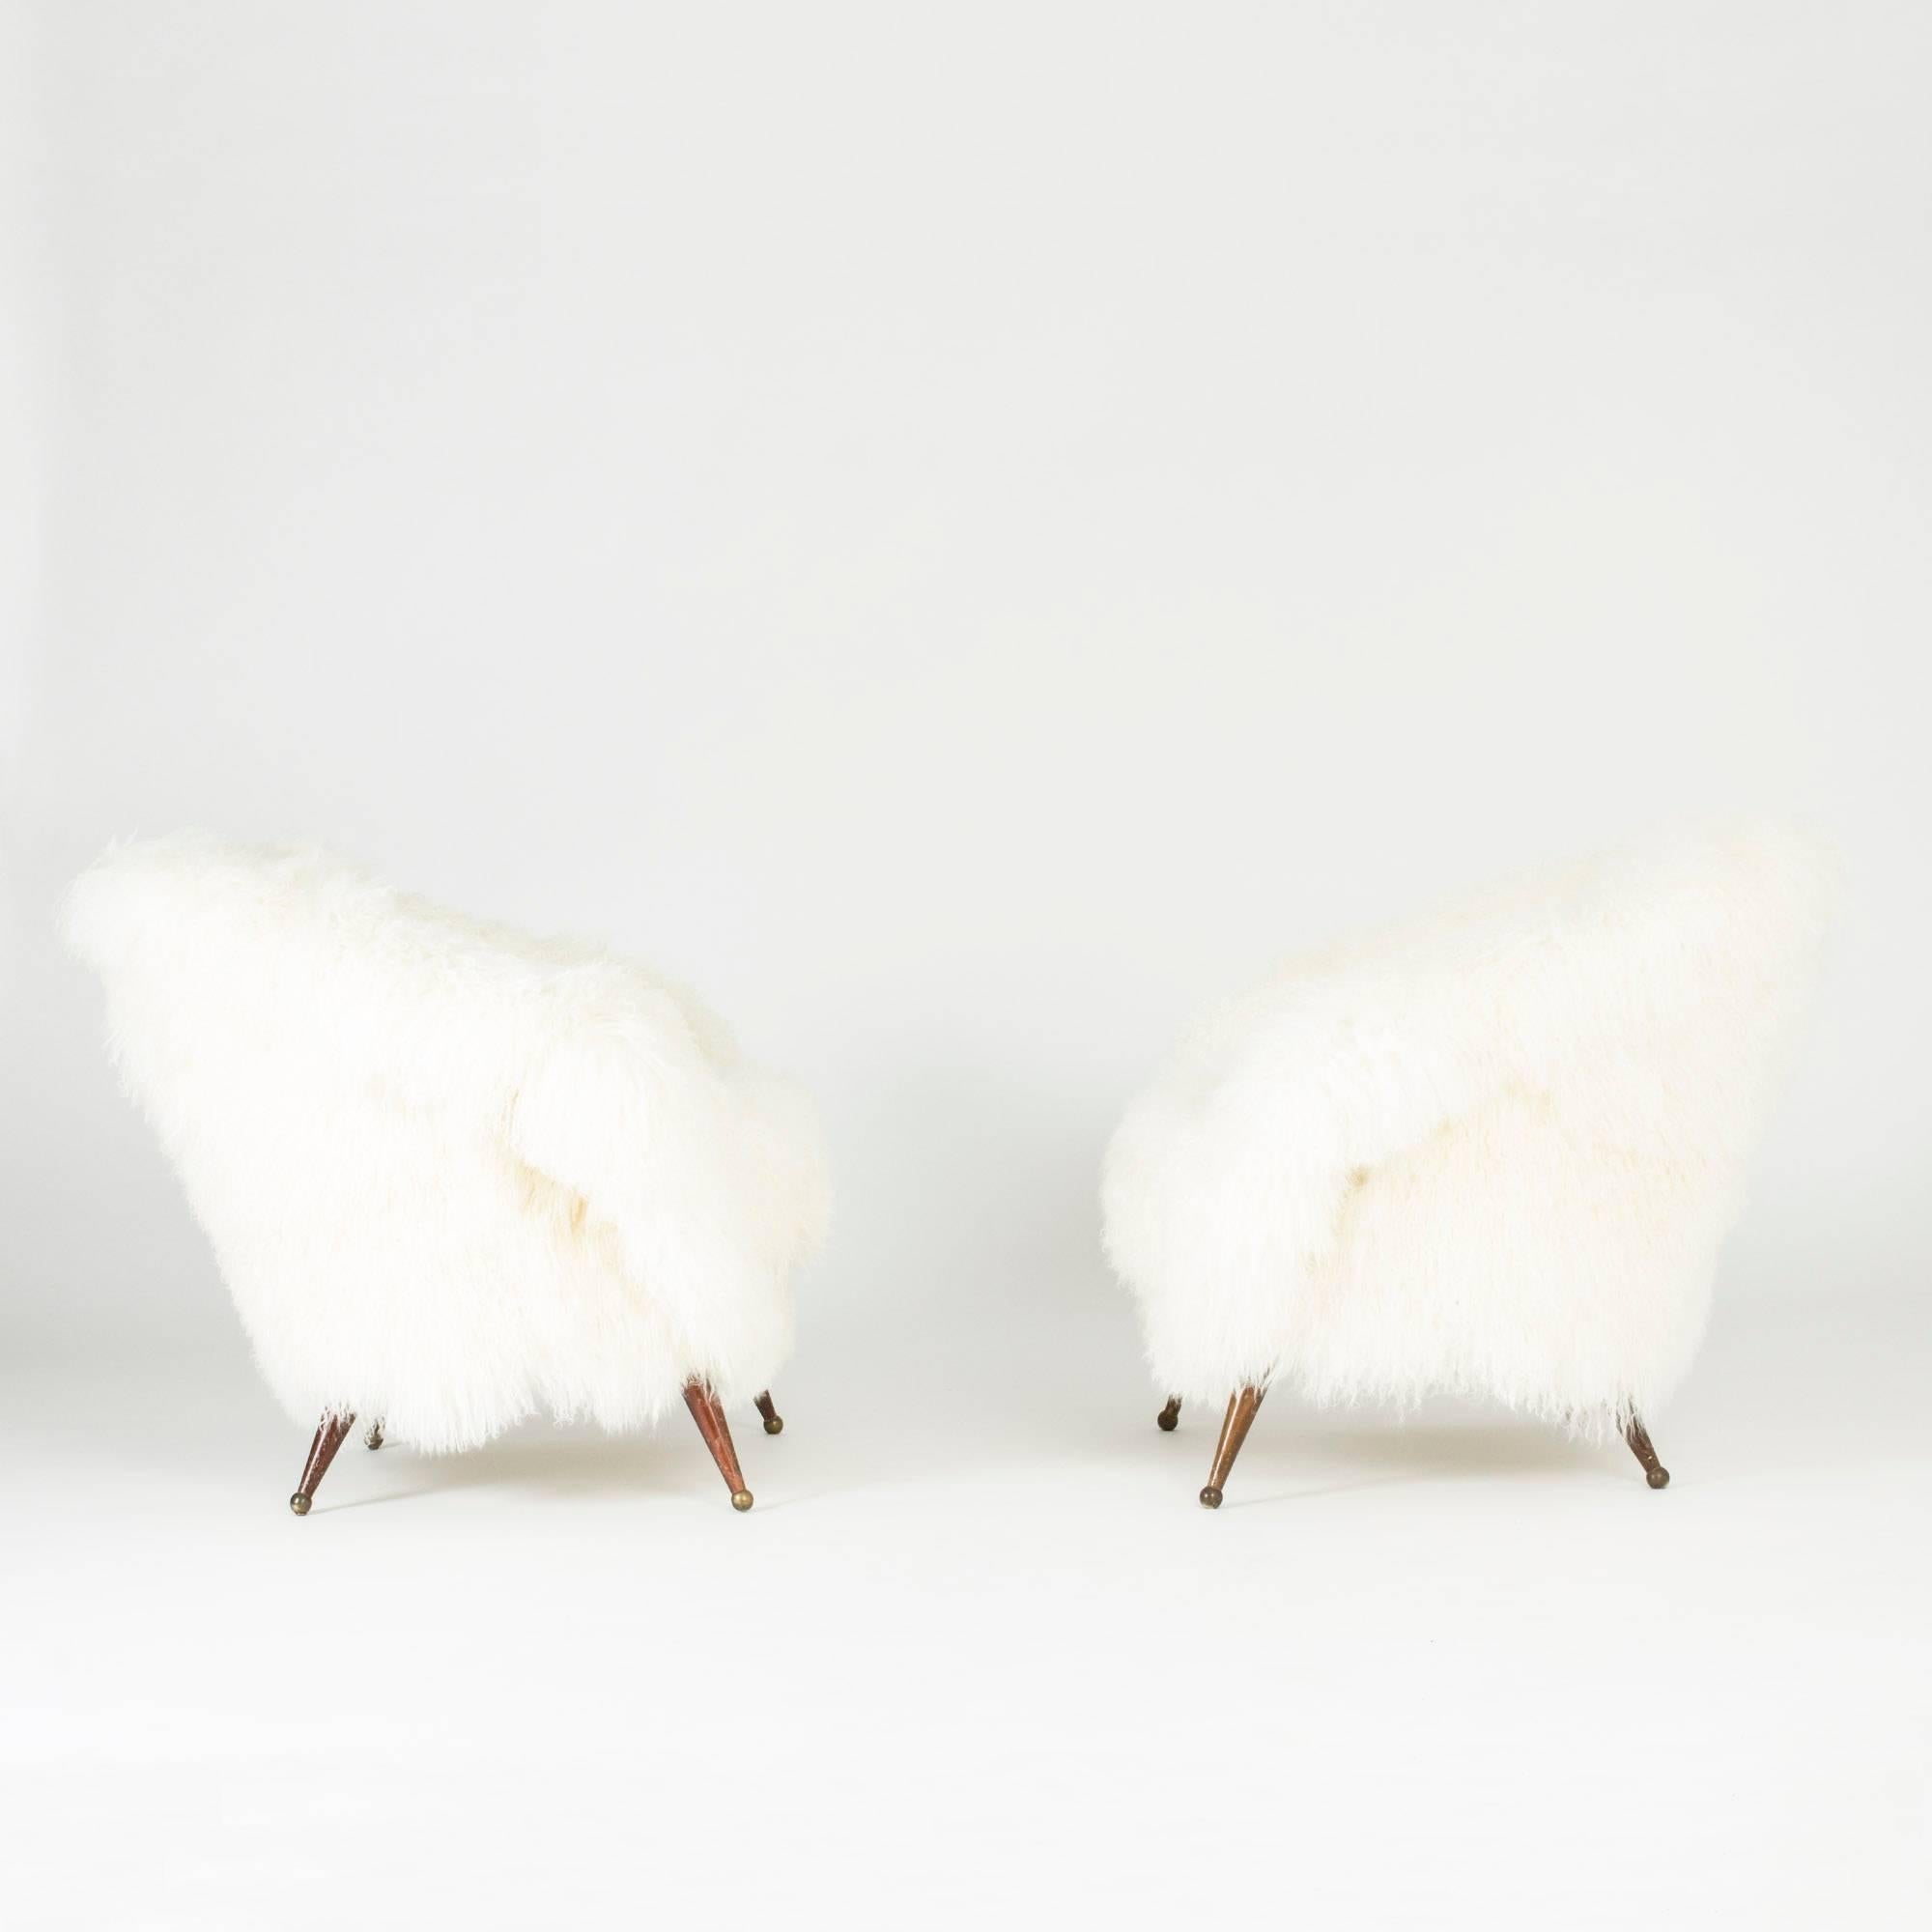 Pair of stunning “Tellus” lounge chairs by Folke Jansson, upholstered with white, long, wavy sheepskin. Rounded, wide and low design with slender legs with brass balls as feet.